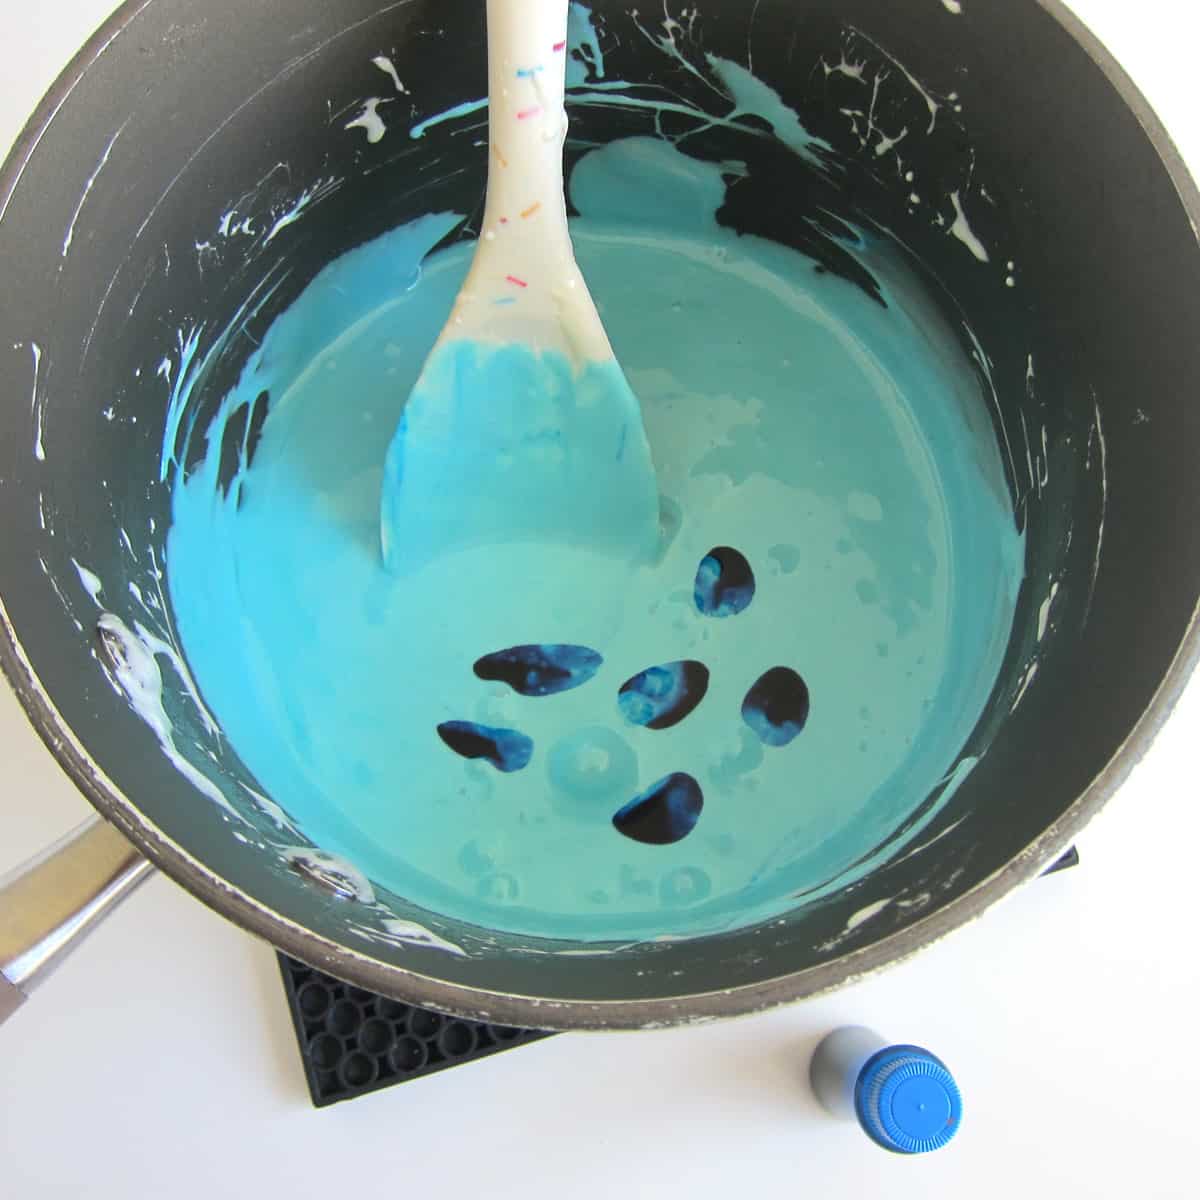 Add more drops of blue food coloring to the melted blue-colored marshmallows.